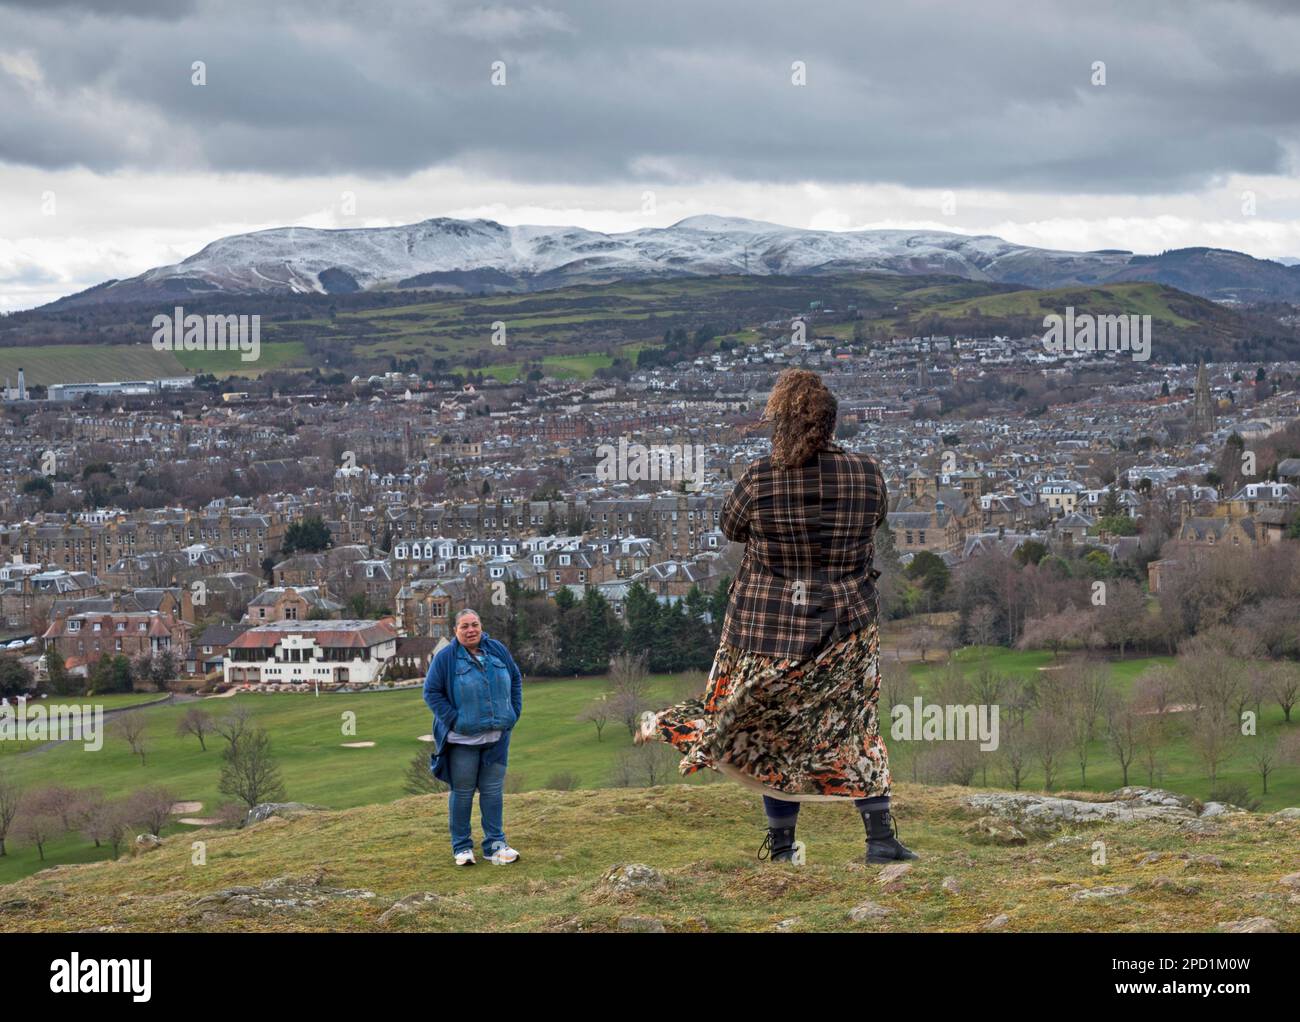 Cold and cloudy in Holyrood Park, Edinburgh, Scotland, UK. 14th March 2023. Temperature of 5 degrees centigrade with wind chill making the real feel of 0 degrees.Pictured: Tourists taking the opportunity to get a scenic view before getting back on the tourist coach. Credit: Archwhite/alamy live news. Stock Photo